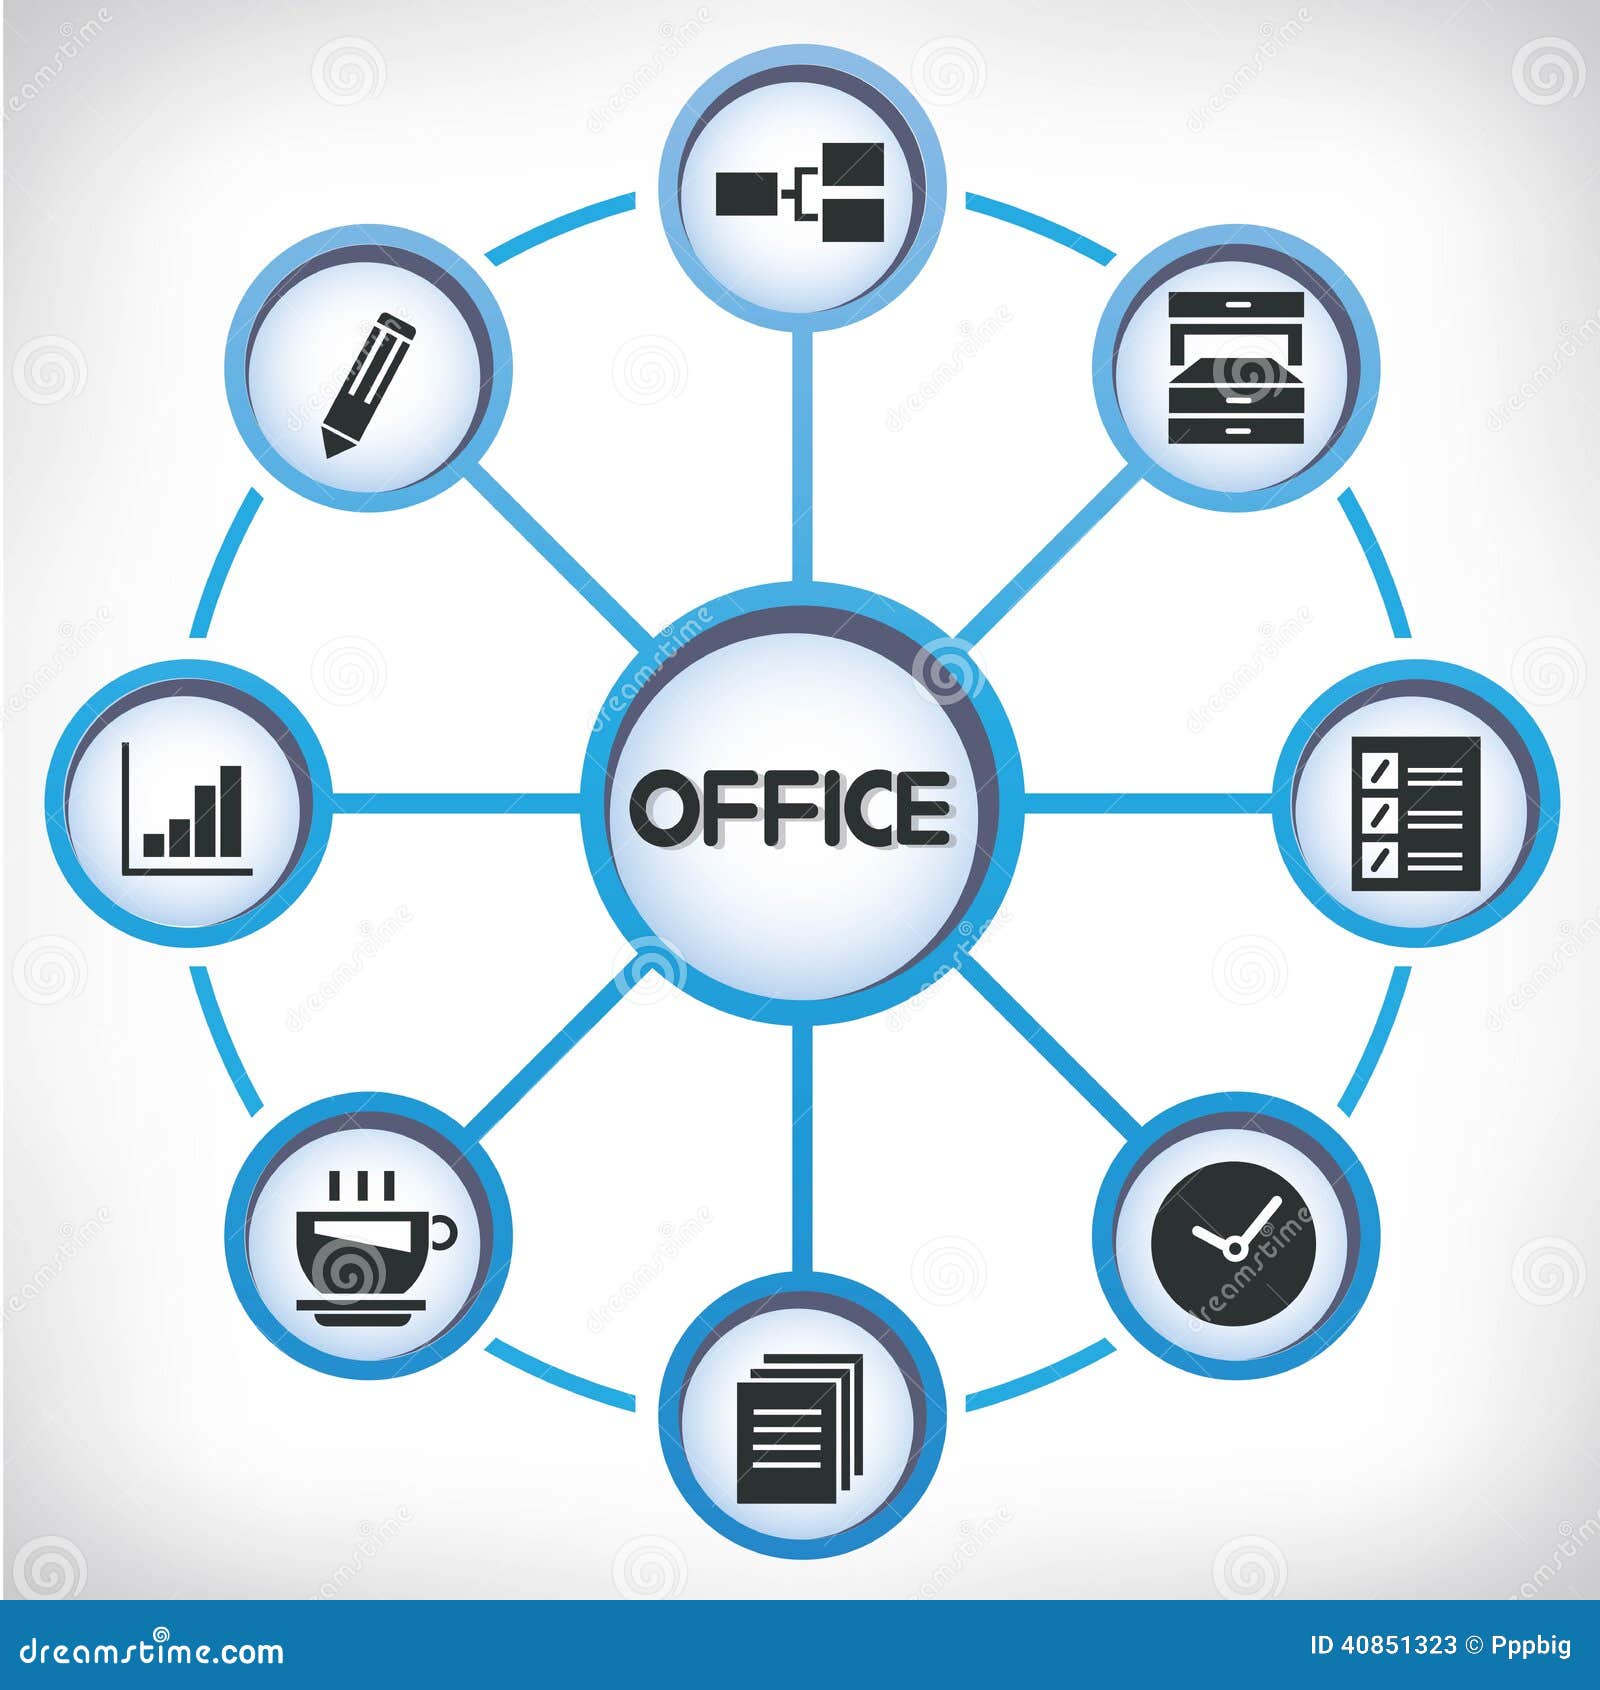 clipart in office 365 - photo #36